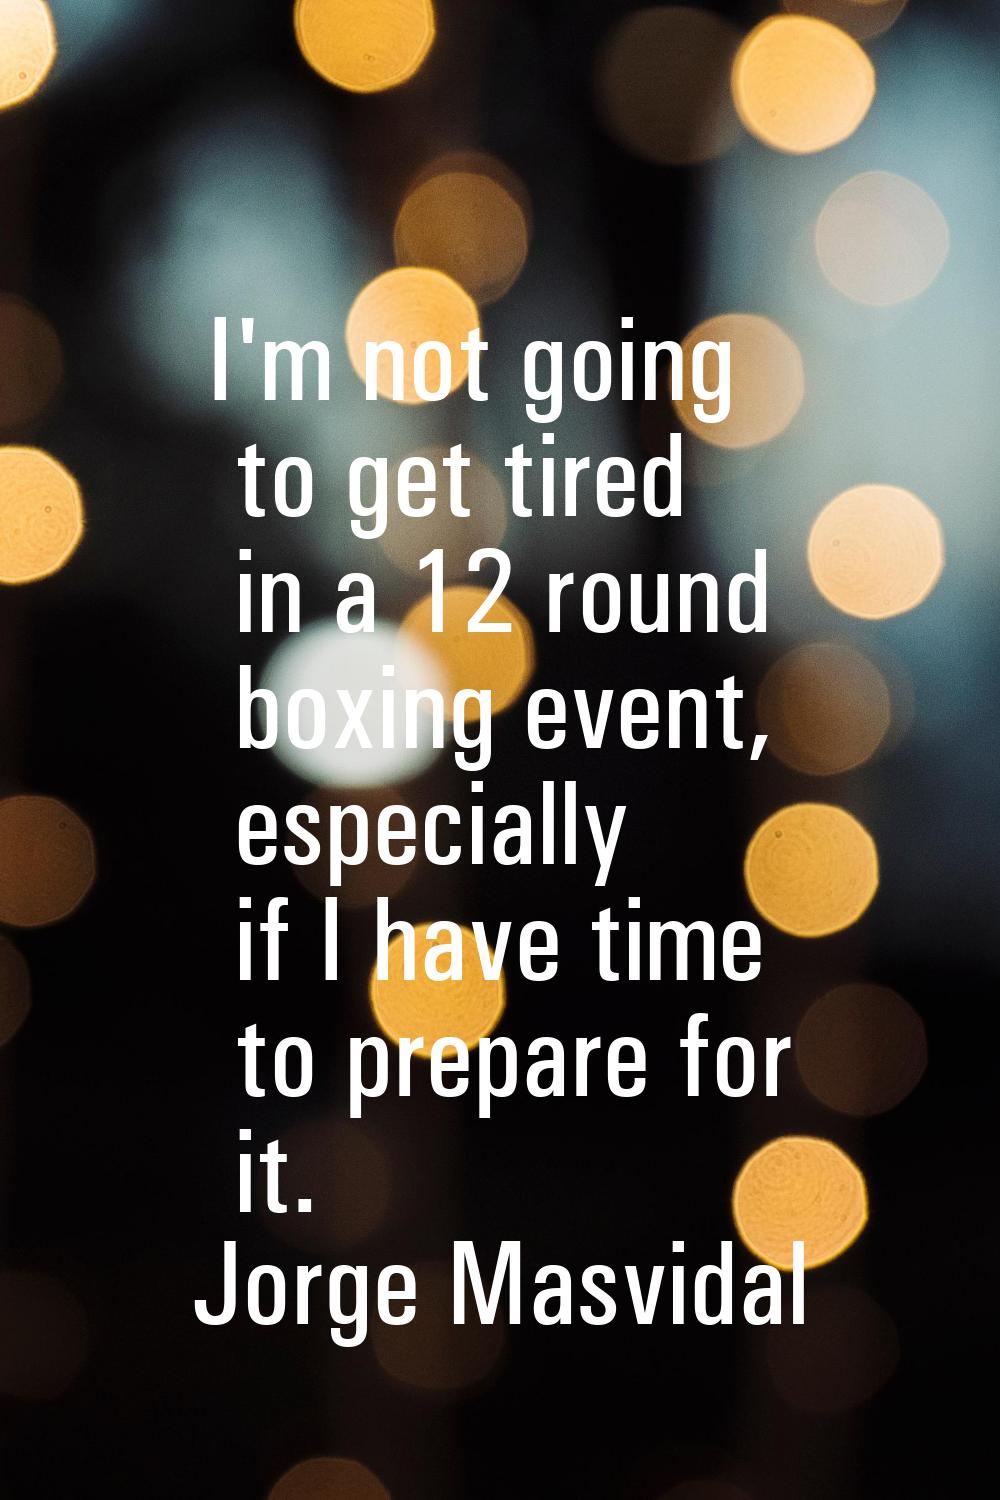 I'm not going to get tired in a 12 round boxing event, especially if I have time to prepare for it.